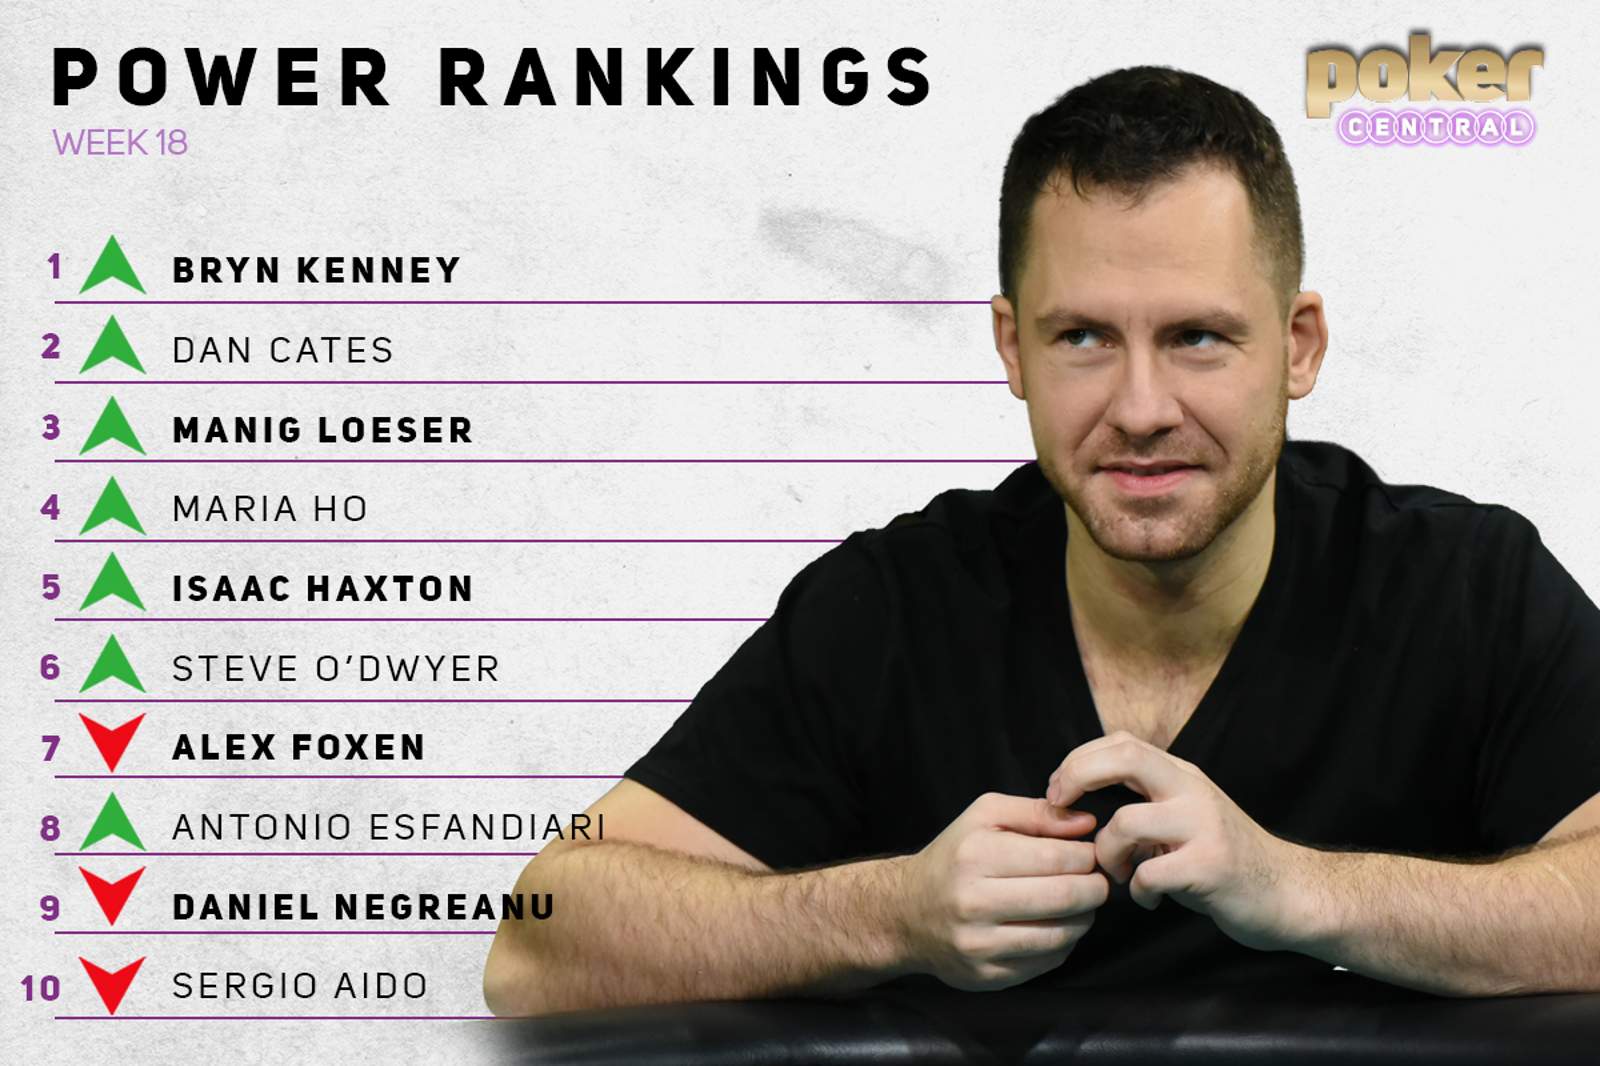 Power Rankings: Kenney's & Loeser Win Big While Jungleman Owns Social Media